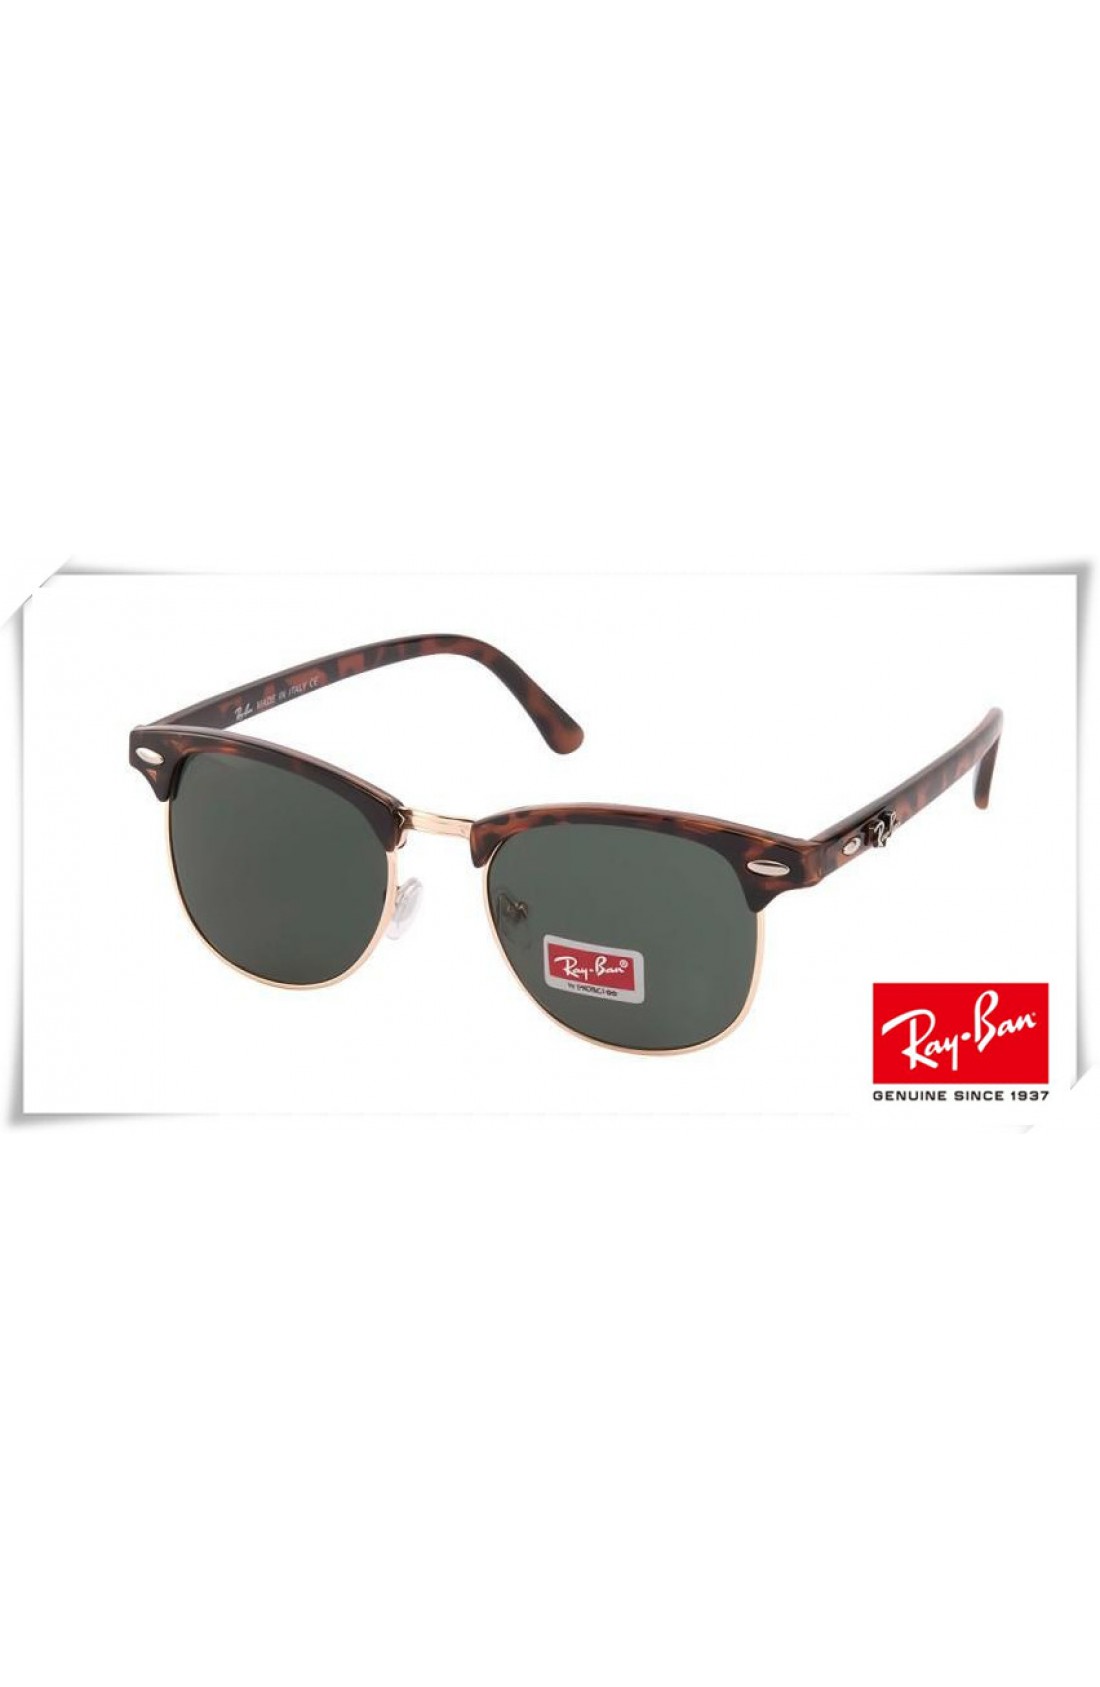 Cheap Ray Ban RB3016 Classic Clubmaster 